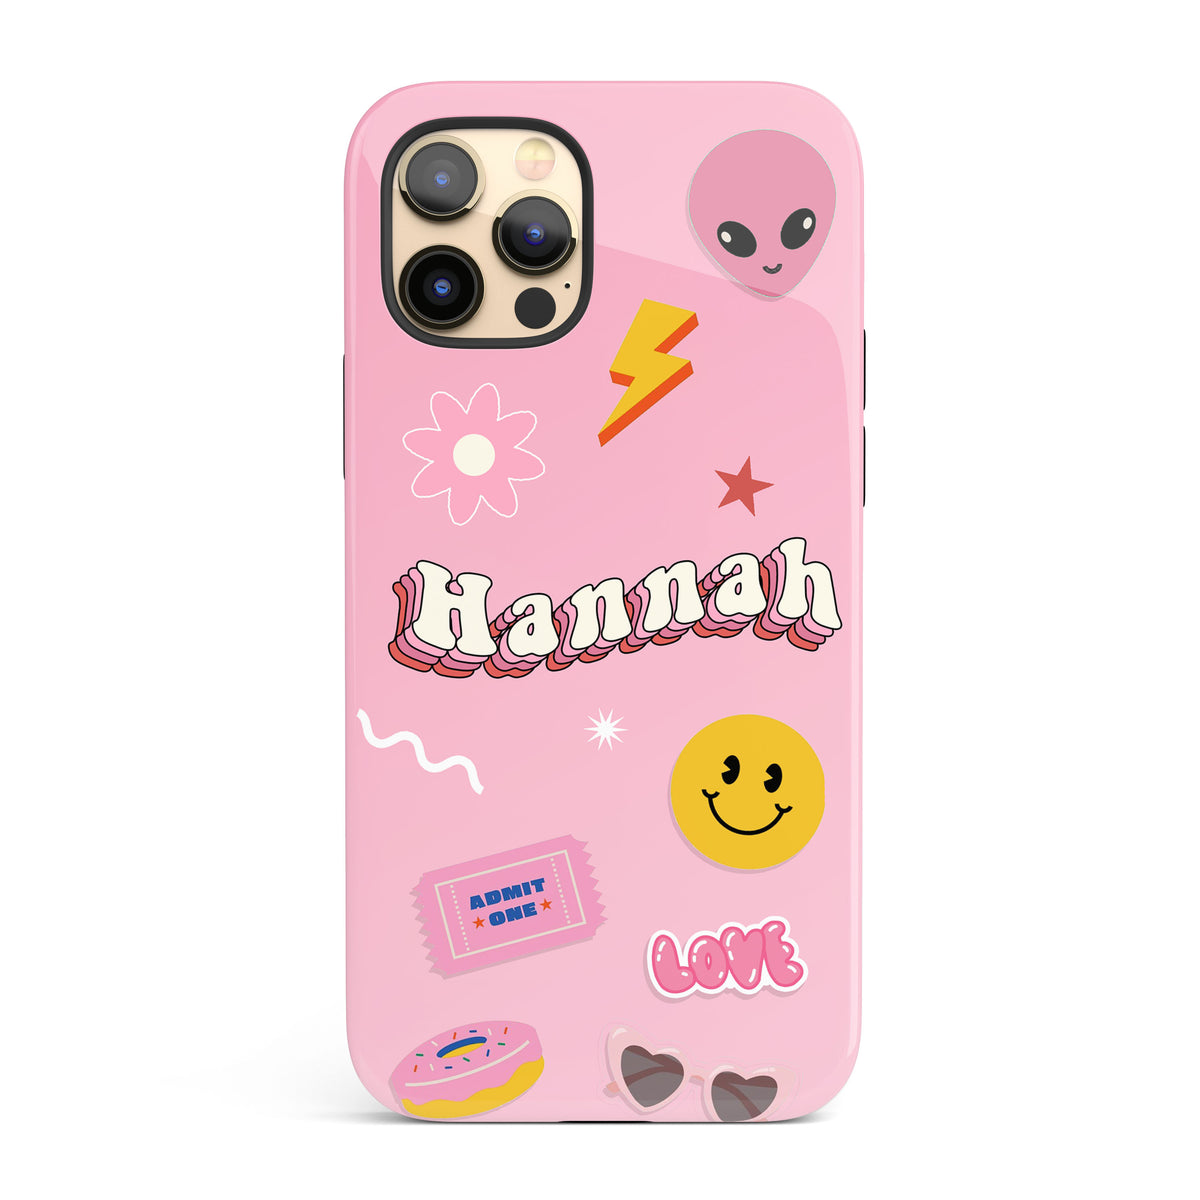 The Personalised Throwback Case